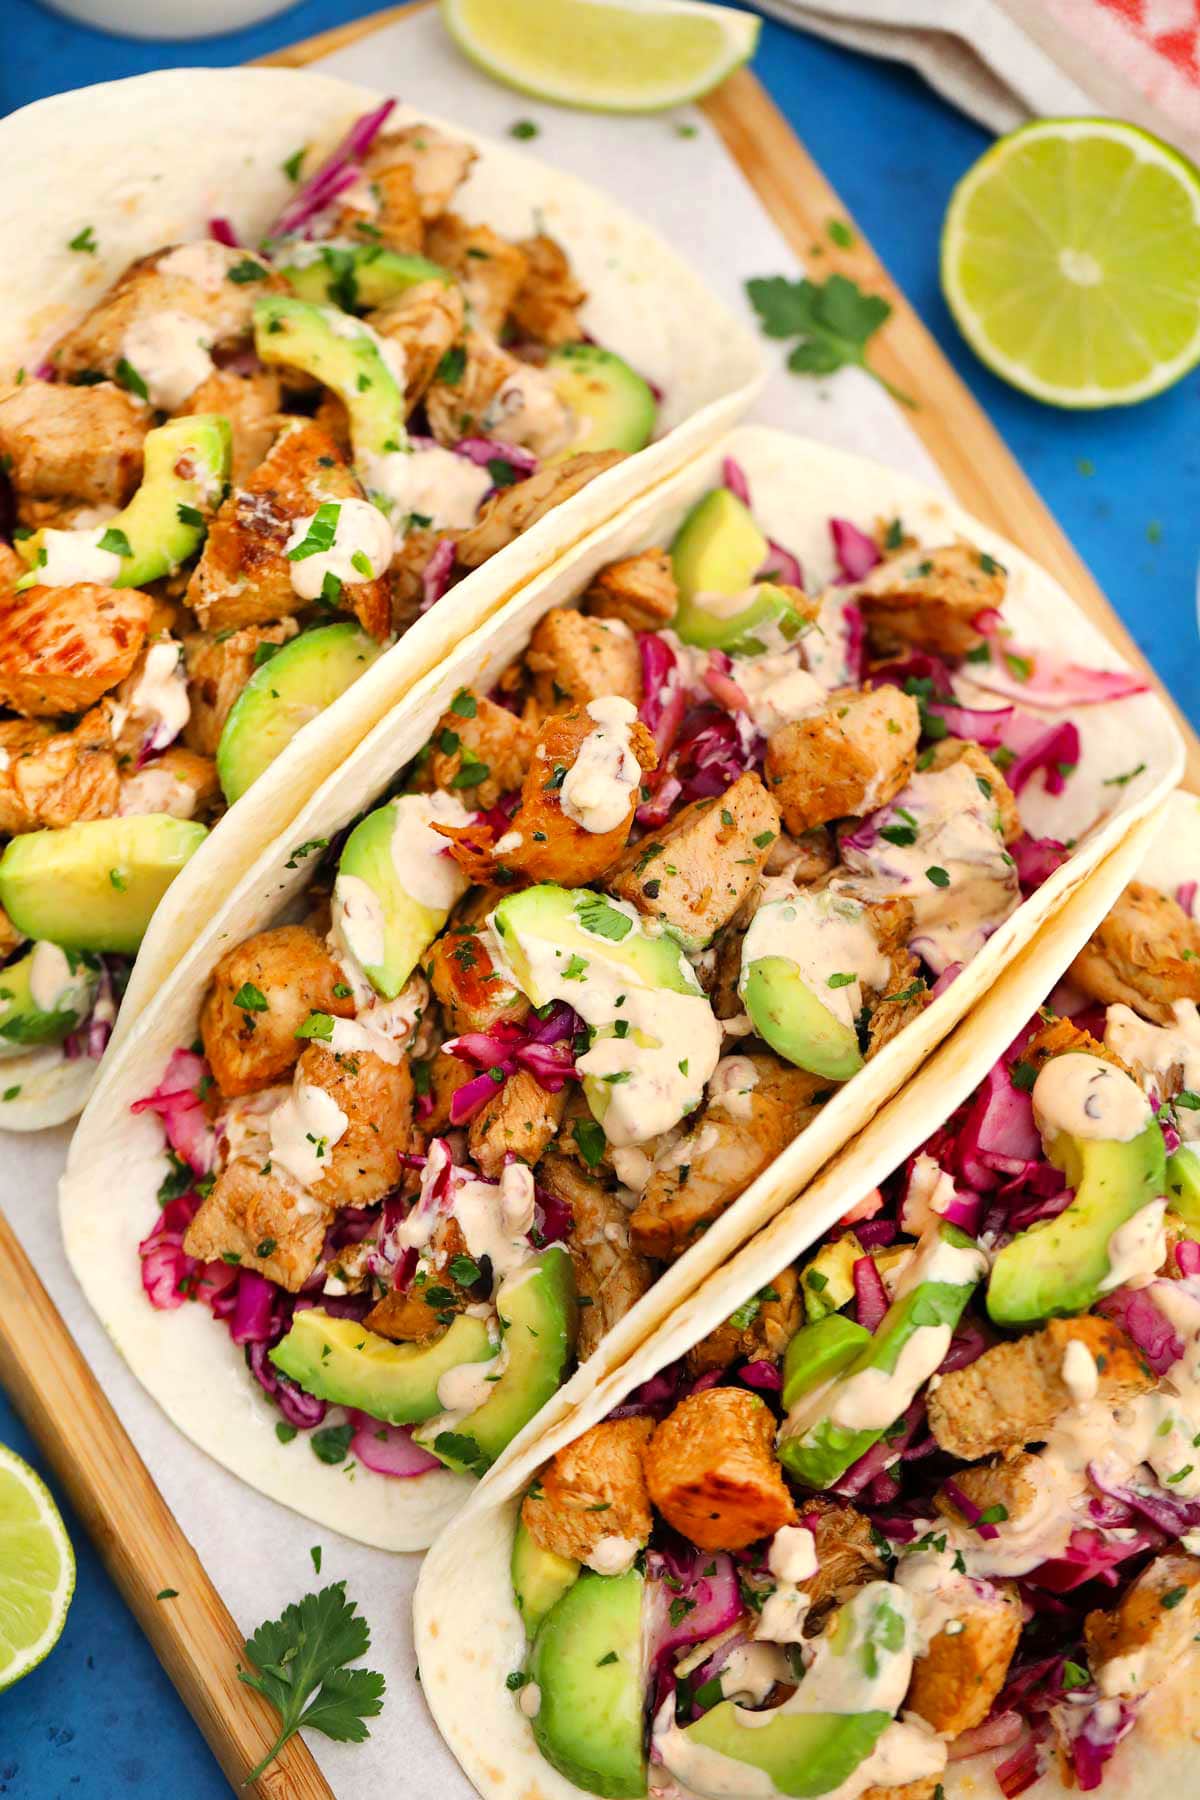 Chipotle Chicken Tacos with Chipotle Sauce [Video] - Sweet and Savory Meals